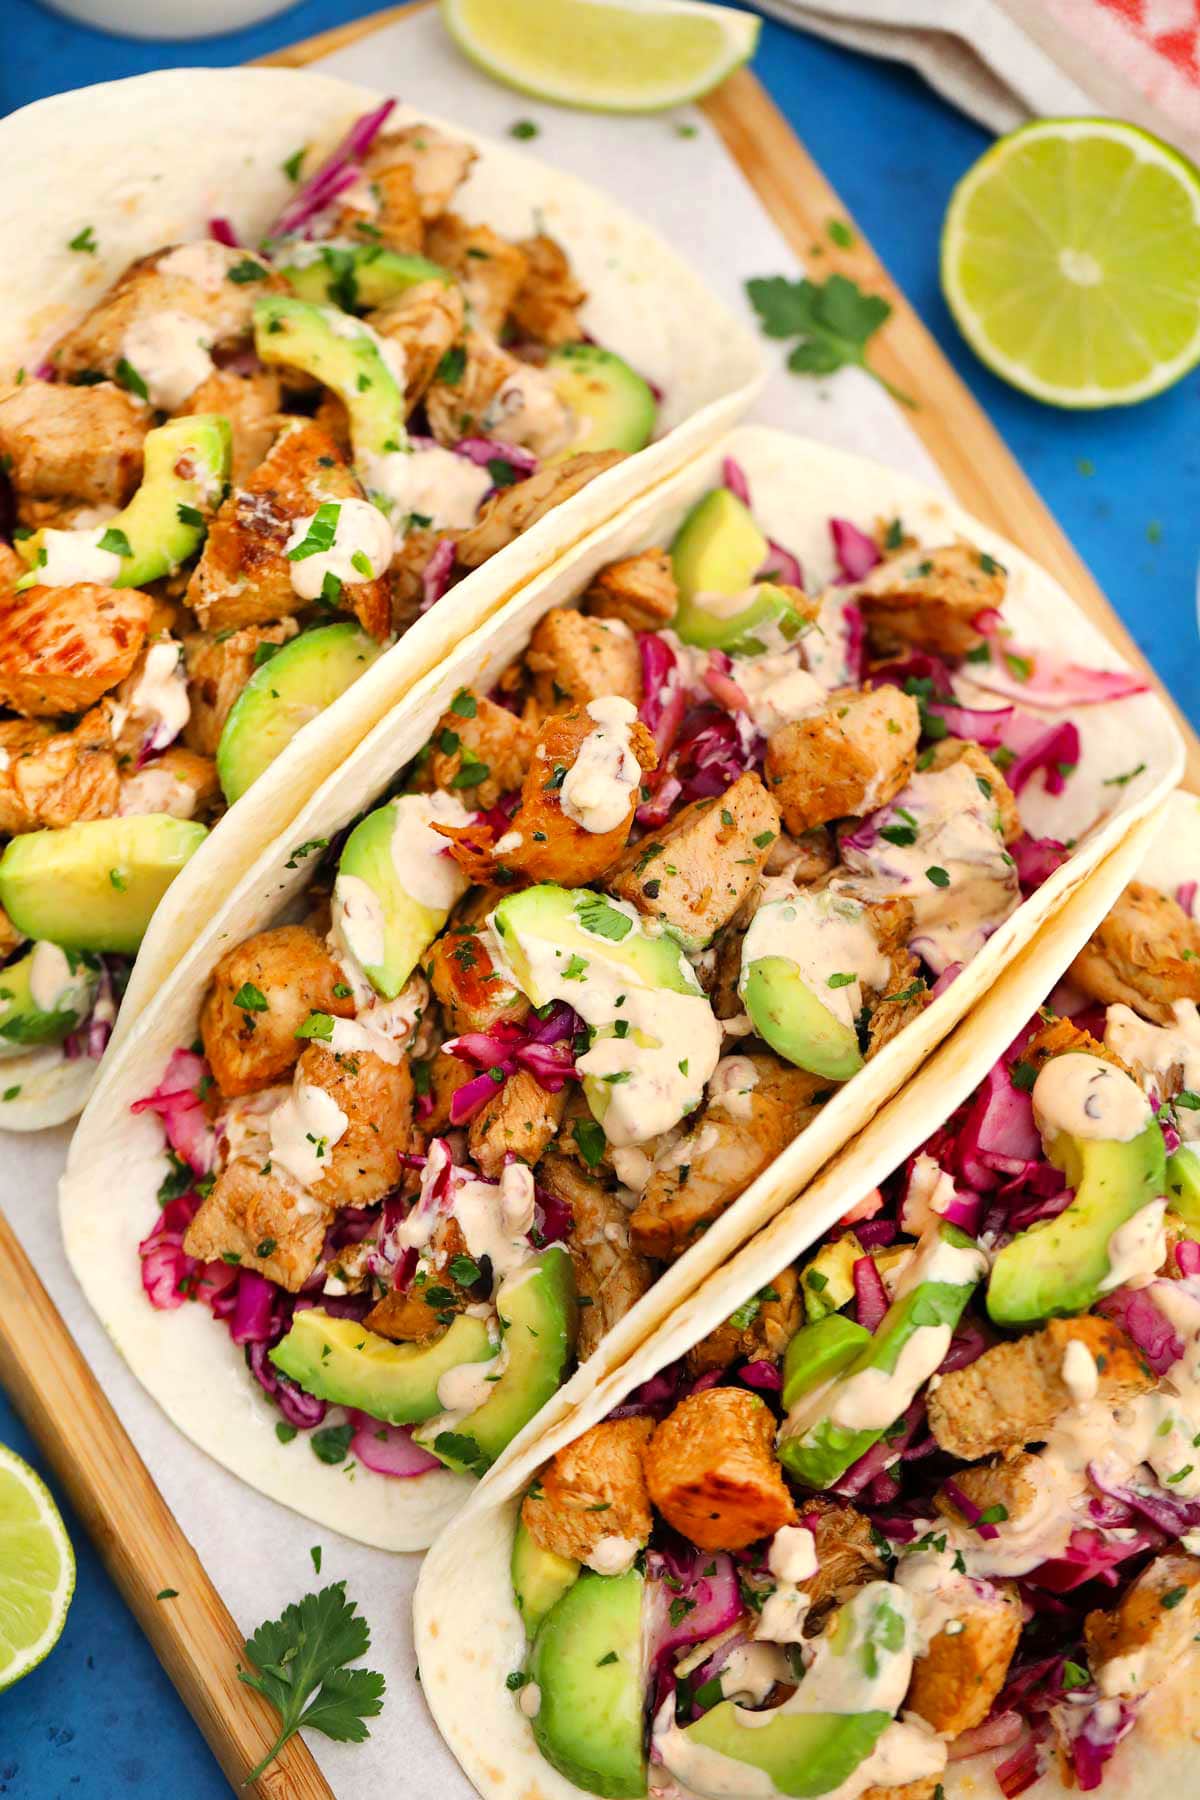 Chipotle Chicken Tacos with Chipotle Sauce [Video] - Sweet and Savory Meals